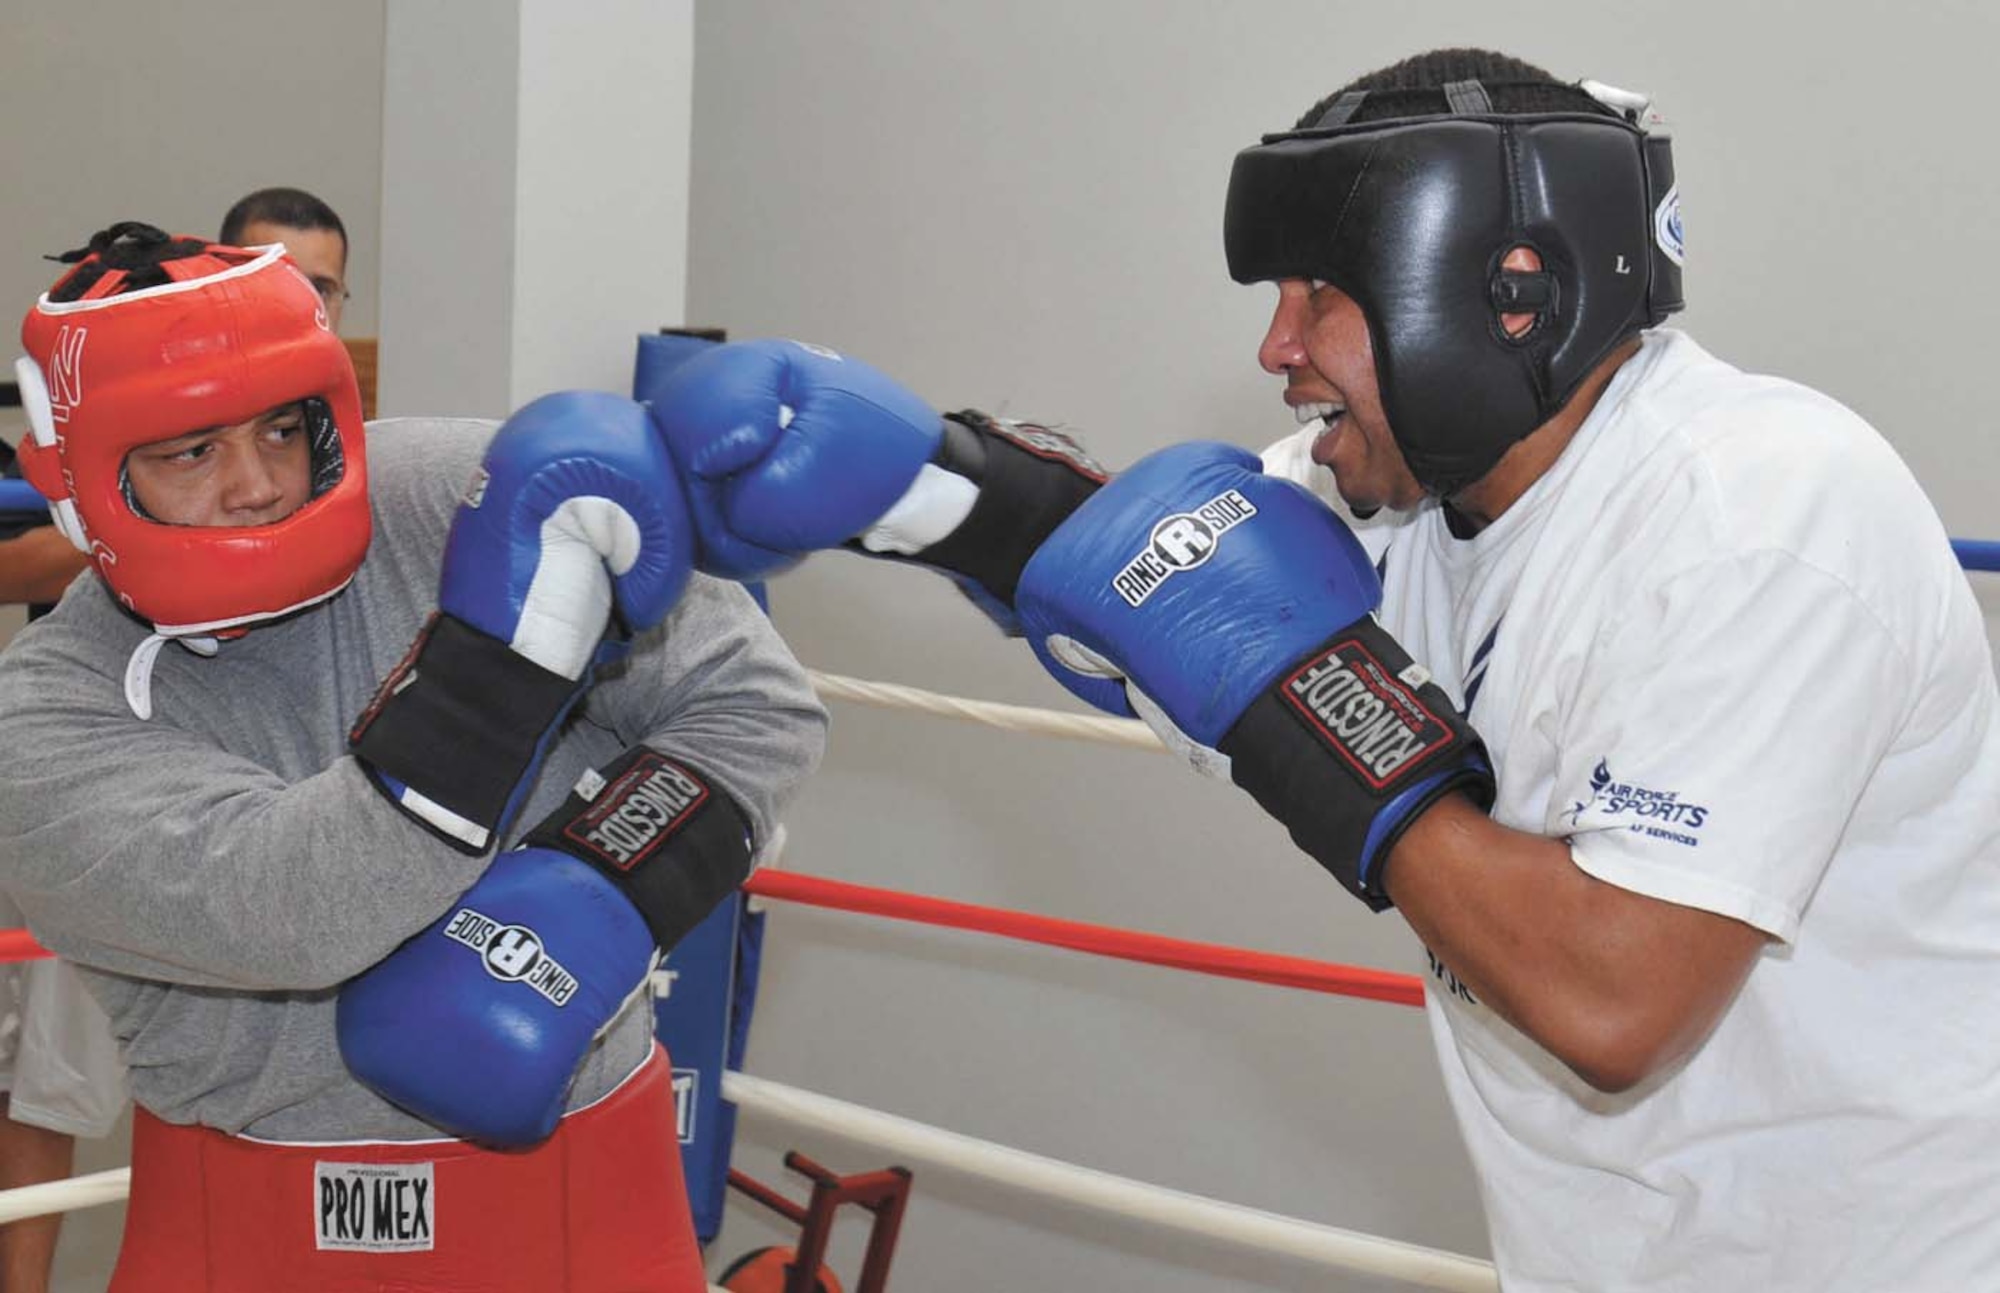 Air Force boxer Kent Brinson fends off a right jab from opponent Forrest Booker during a sparring session at the Chaparral Fitness Center. (U.S. Air Force photo/Alan Boedeker)